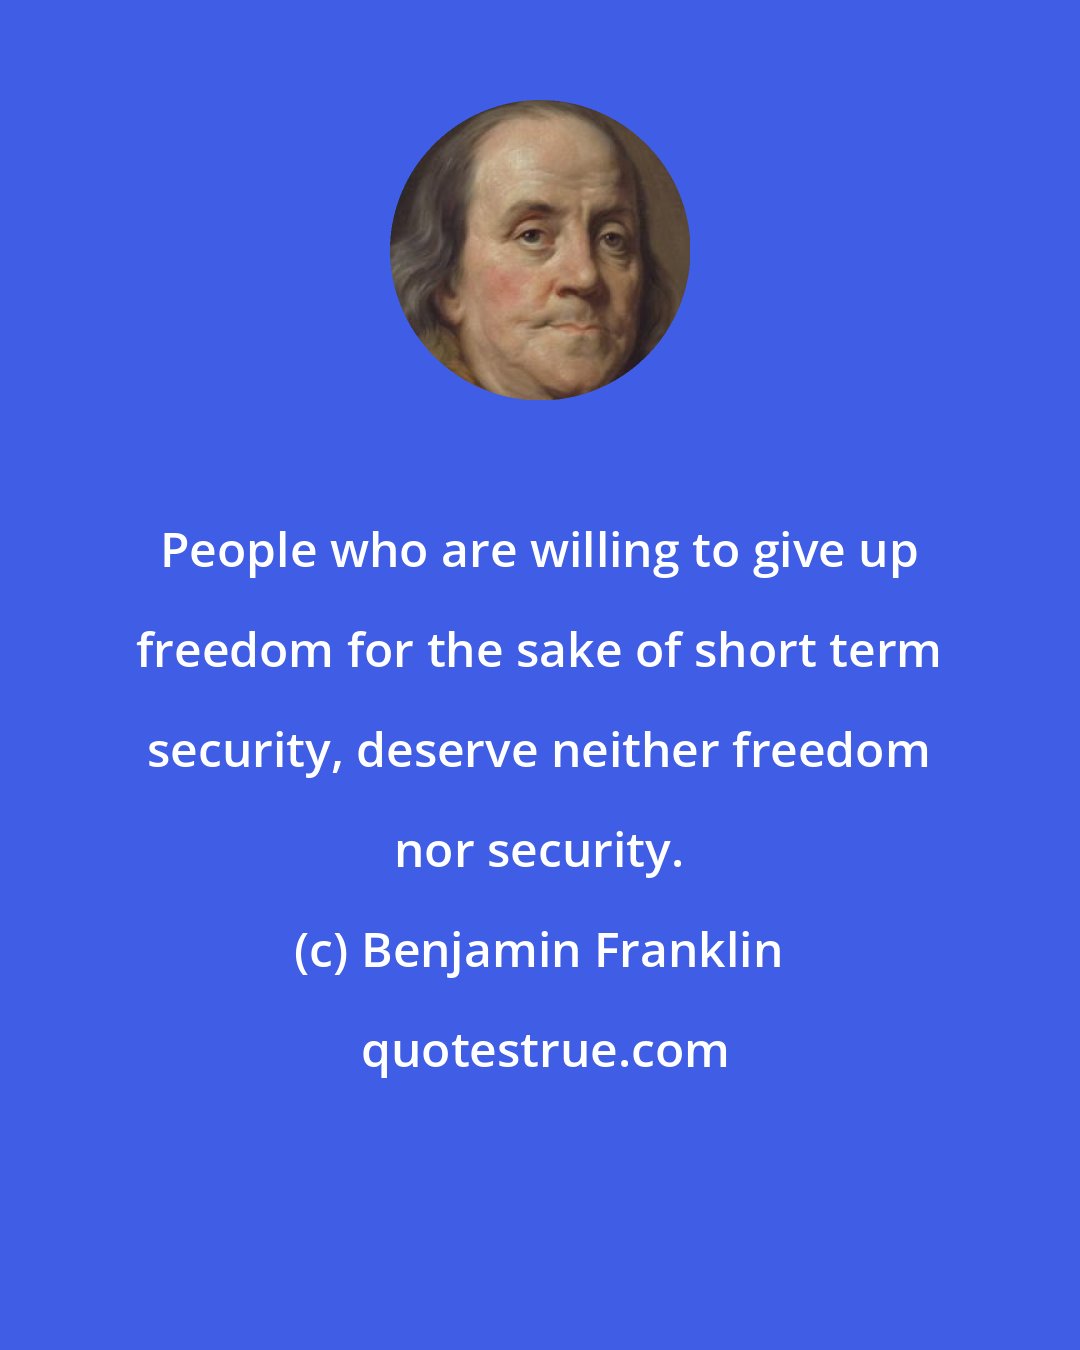 Benjamin Franklin: People who are willing to give up freedom for the sake of short term security, deserve neither freedom nor security.